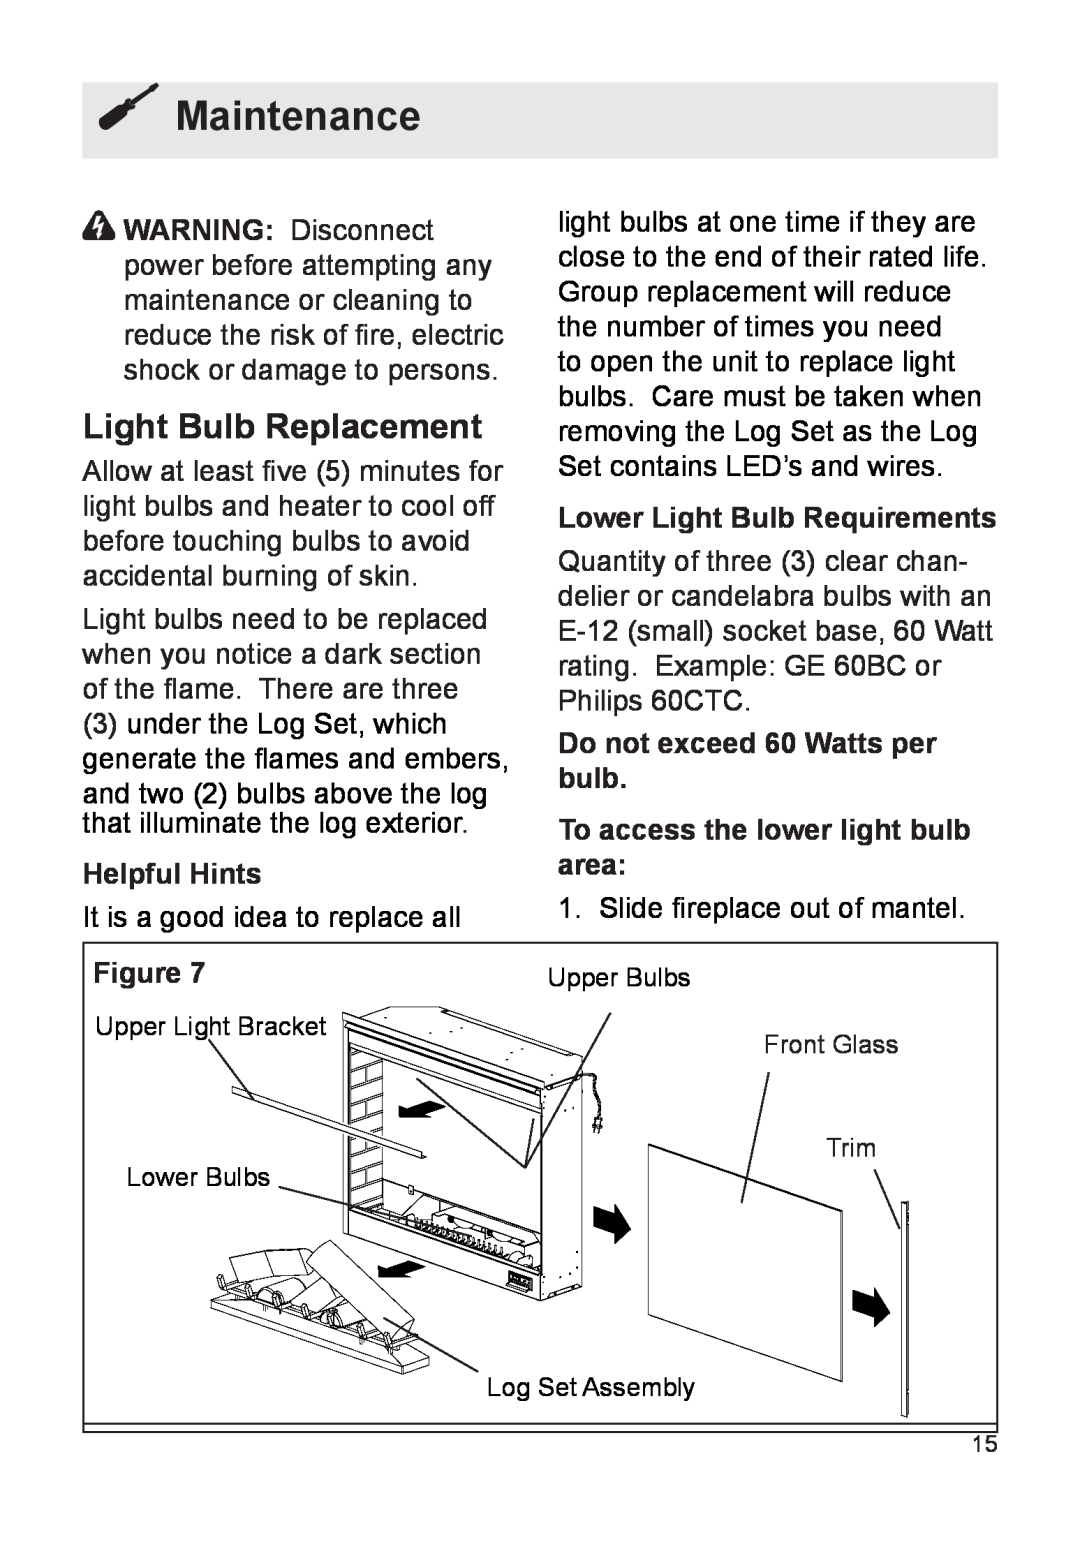 Dimplex DFB8842 owner manual Maintenance, Light Bulb Replacement, Helpful Hints, Lower Light Bulb Requirements 